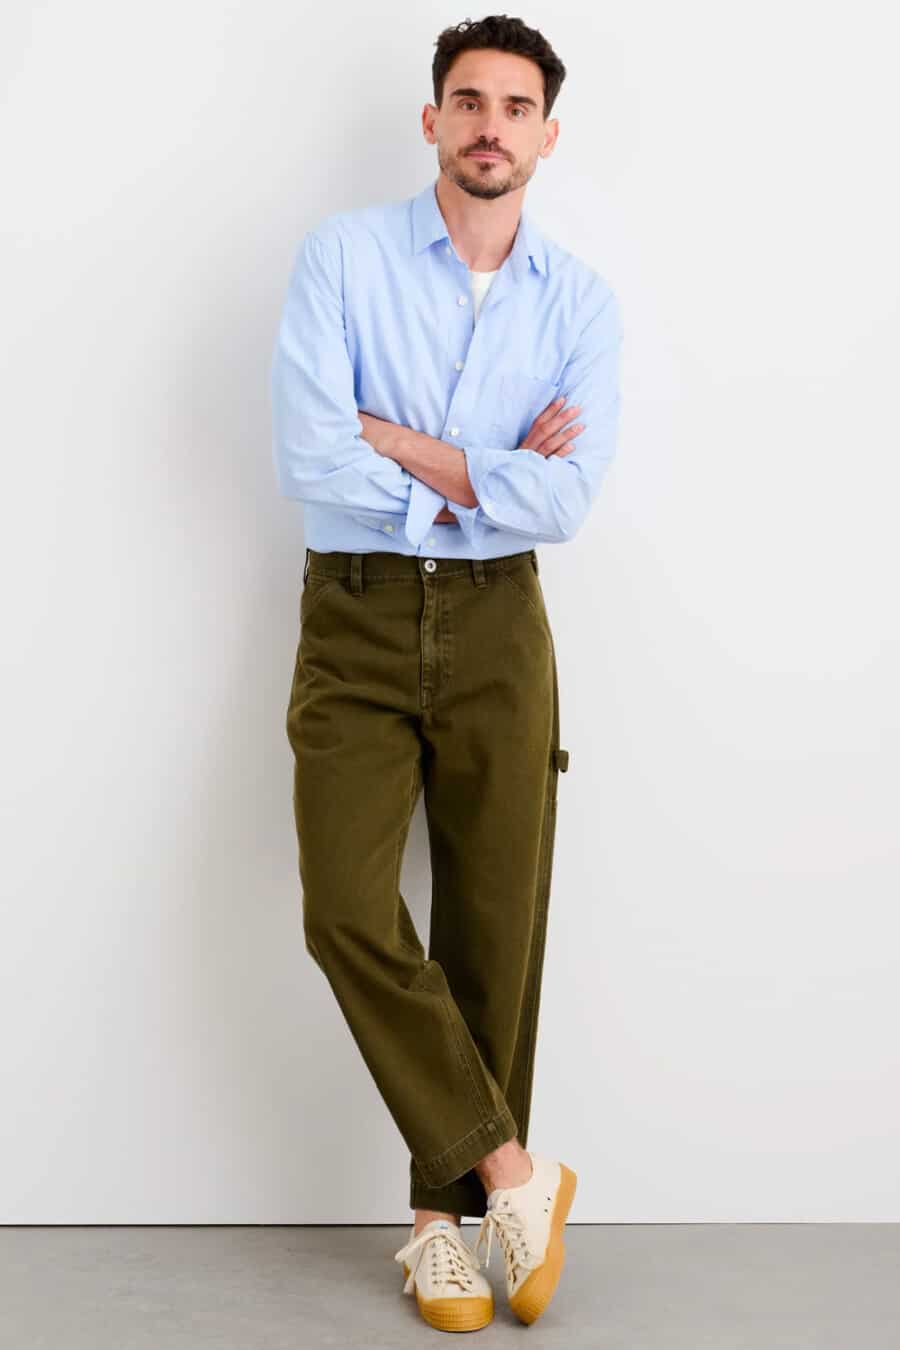 Men's green carpenter pants, light blue Oxford shirt and canvas sneakers outfit